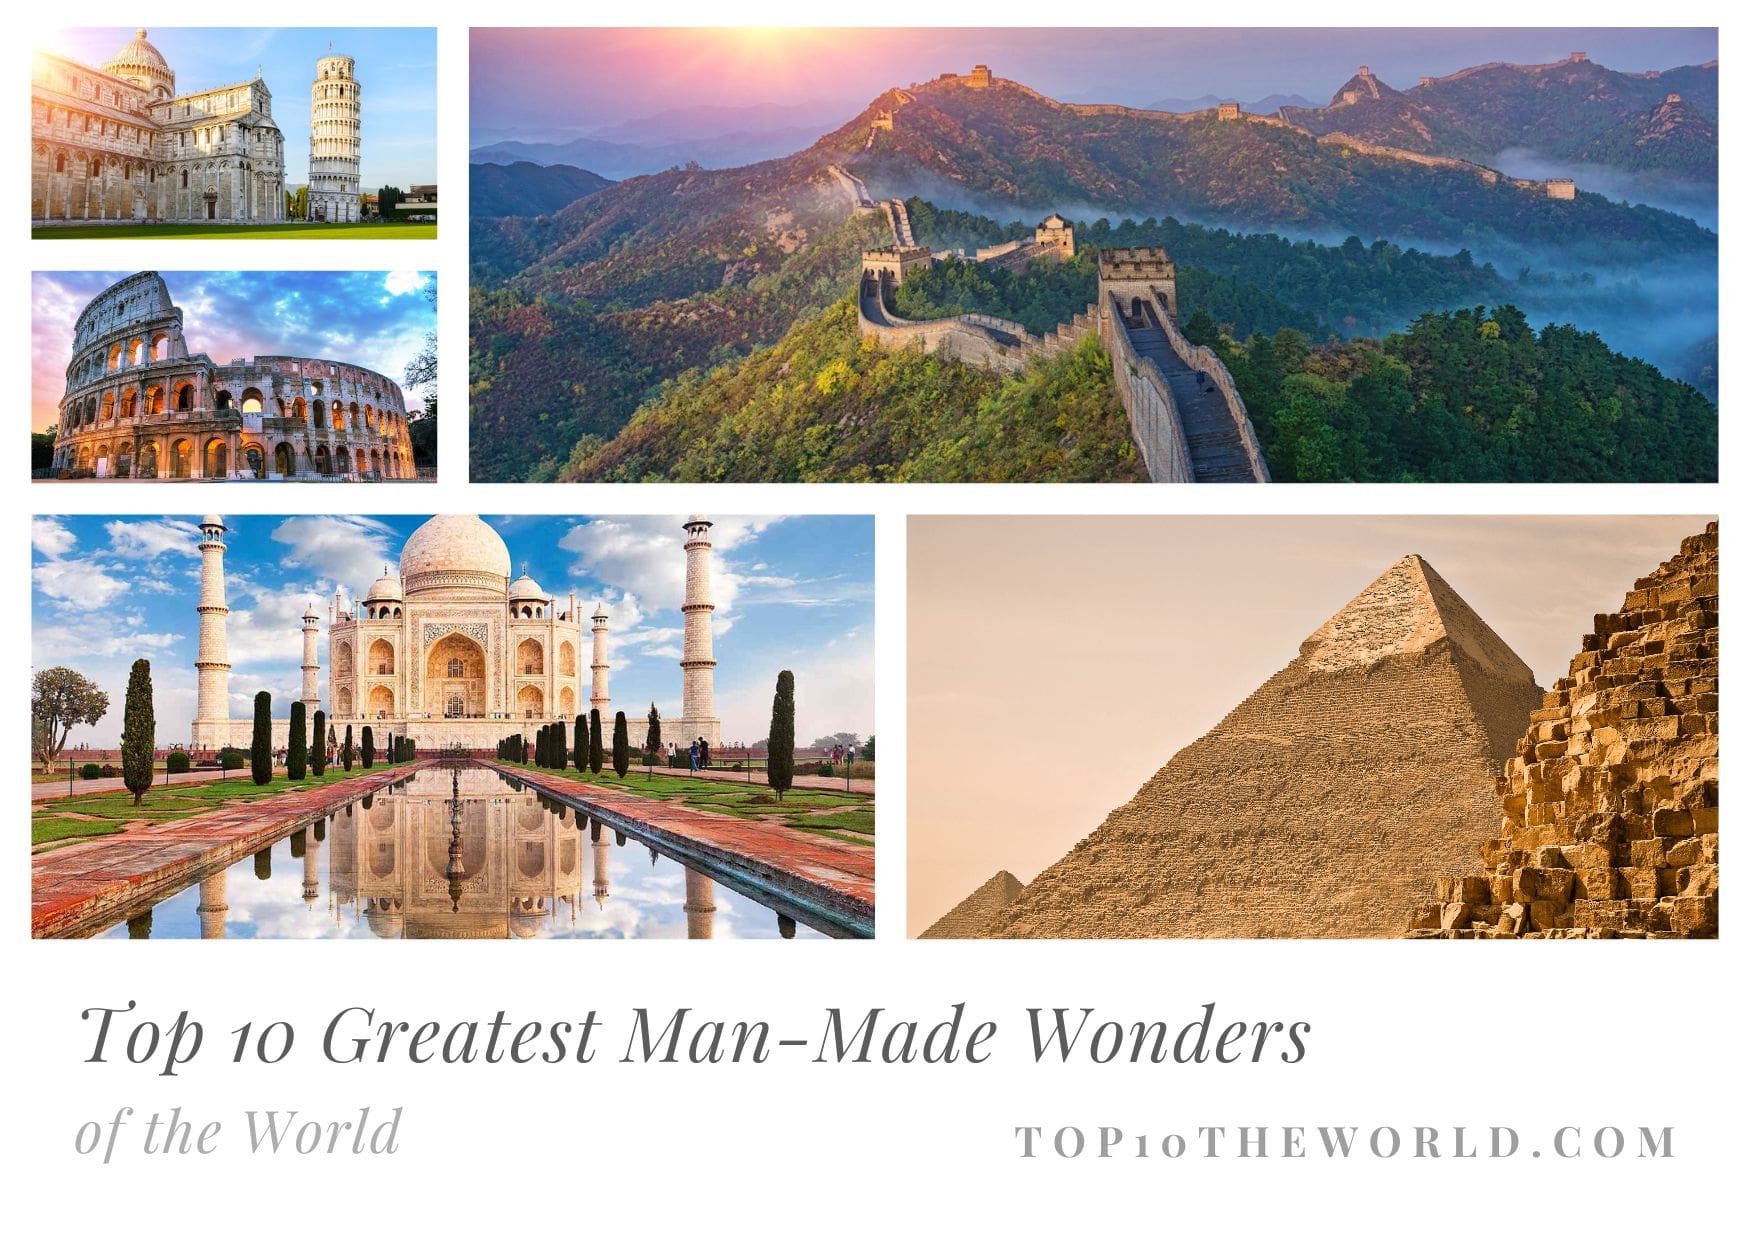 Top 10 Greatest Man-Made Wonders of the World